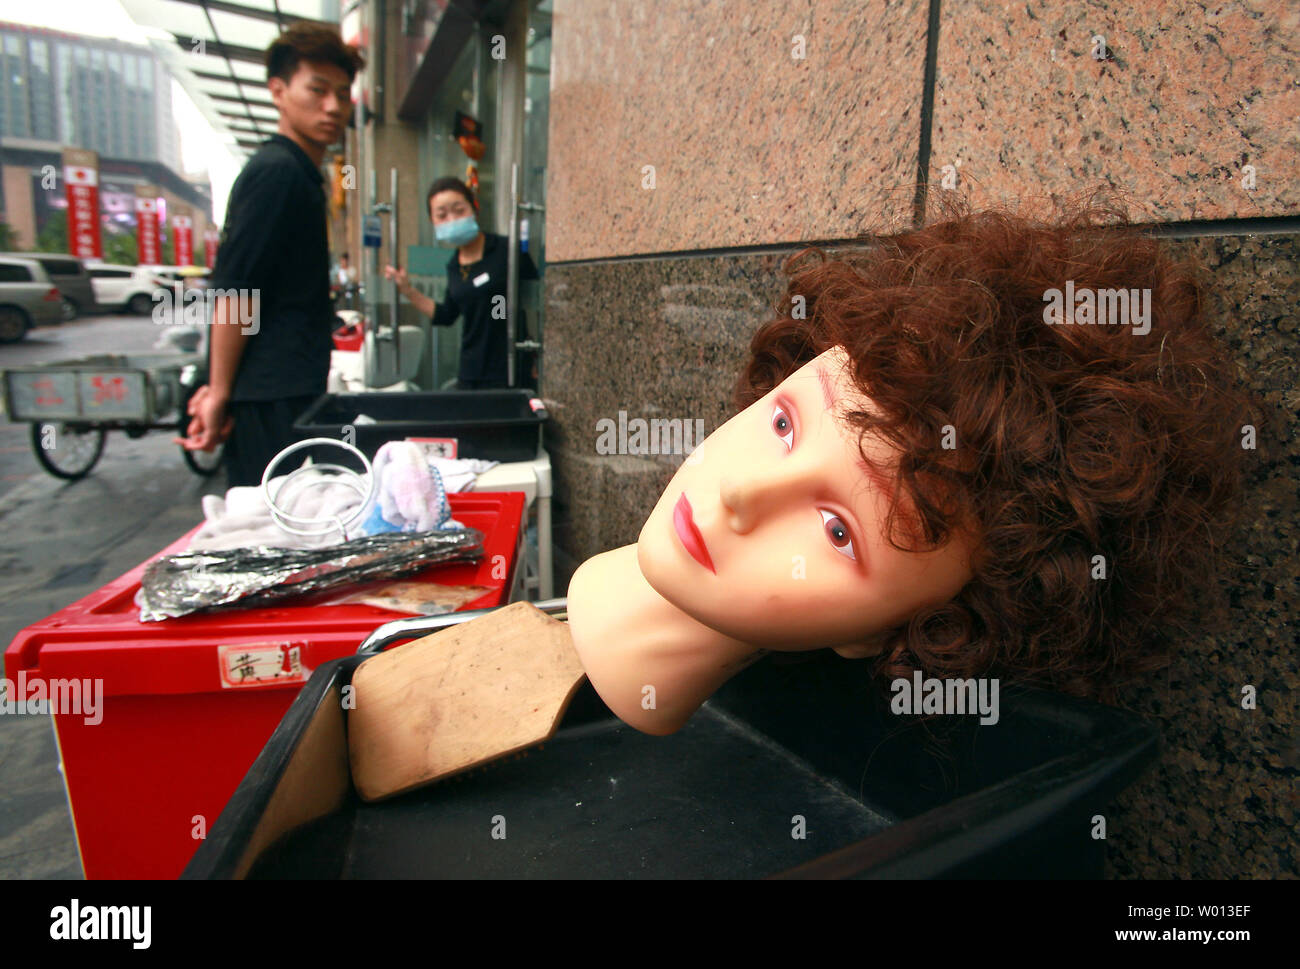 A Western-looking mannequin's head attached to a hair brush lays on a cart  outside a Chinese hair salon in Beijing on July 14, 2013. Modern, Western hair  styles, along with being 'blond',